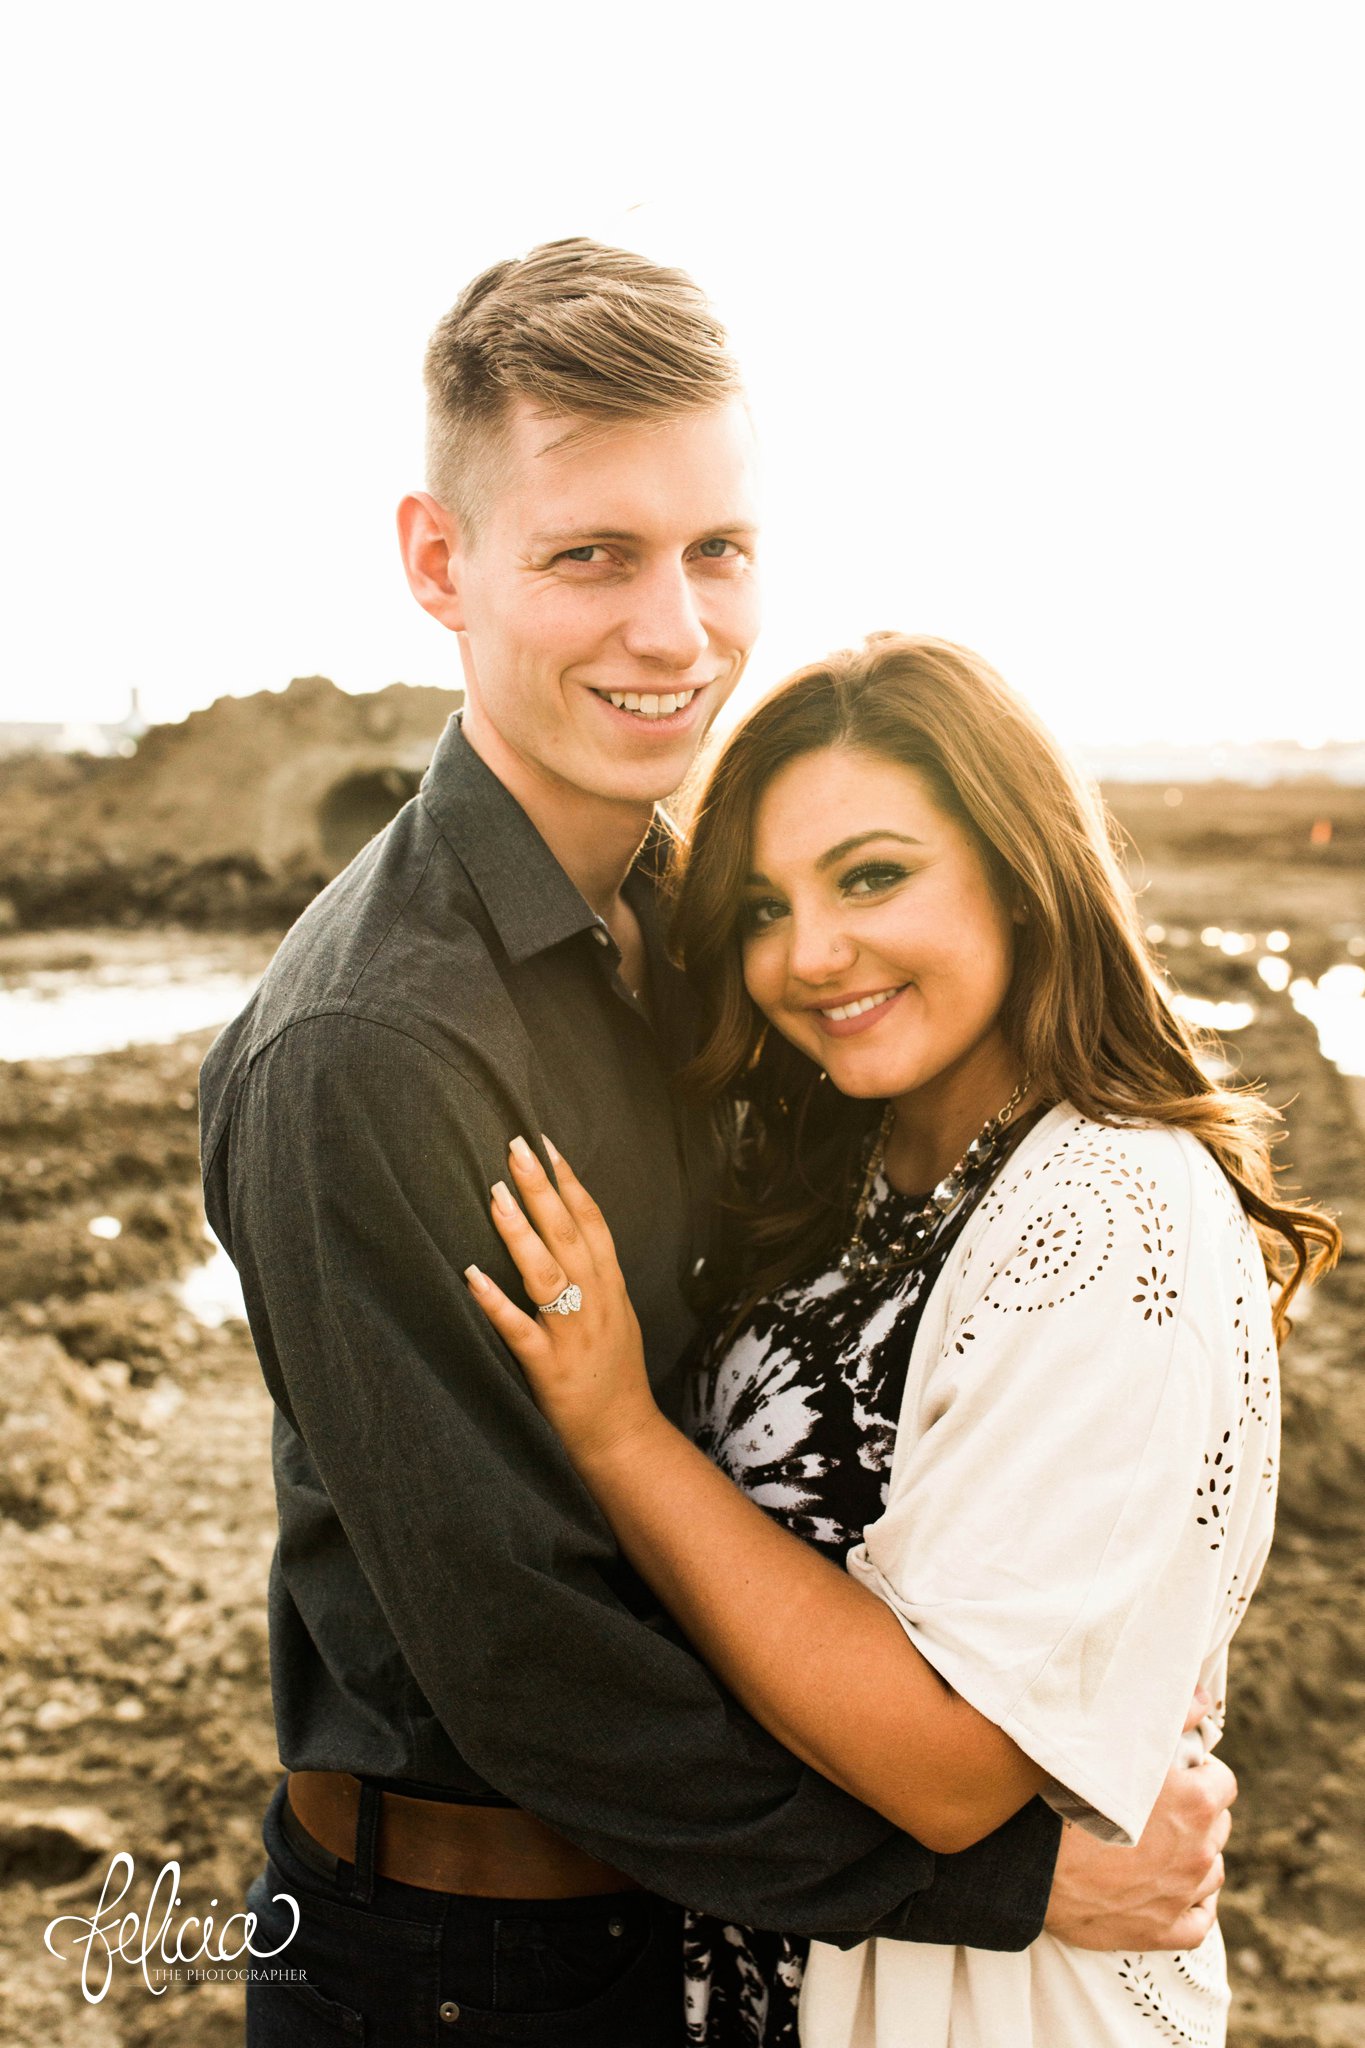 Edgy Engagement - Felicia The Photographer_0031